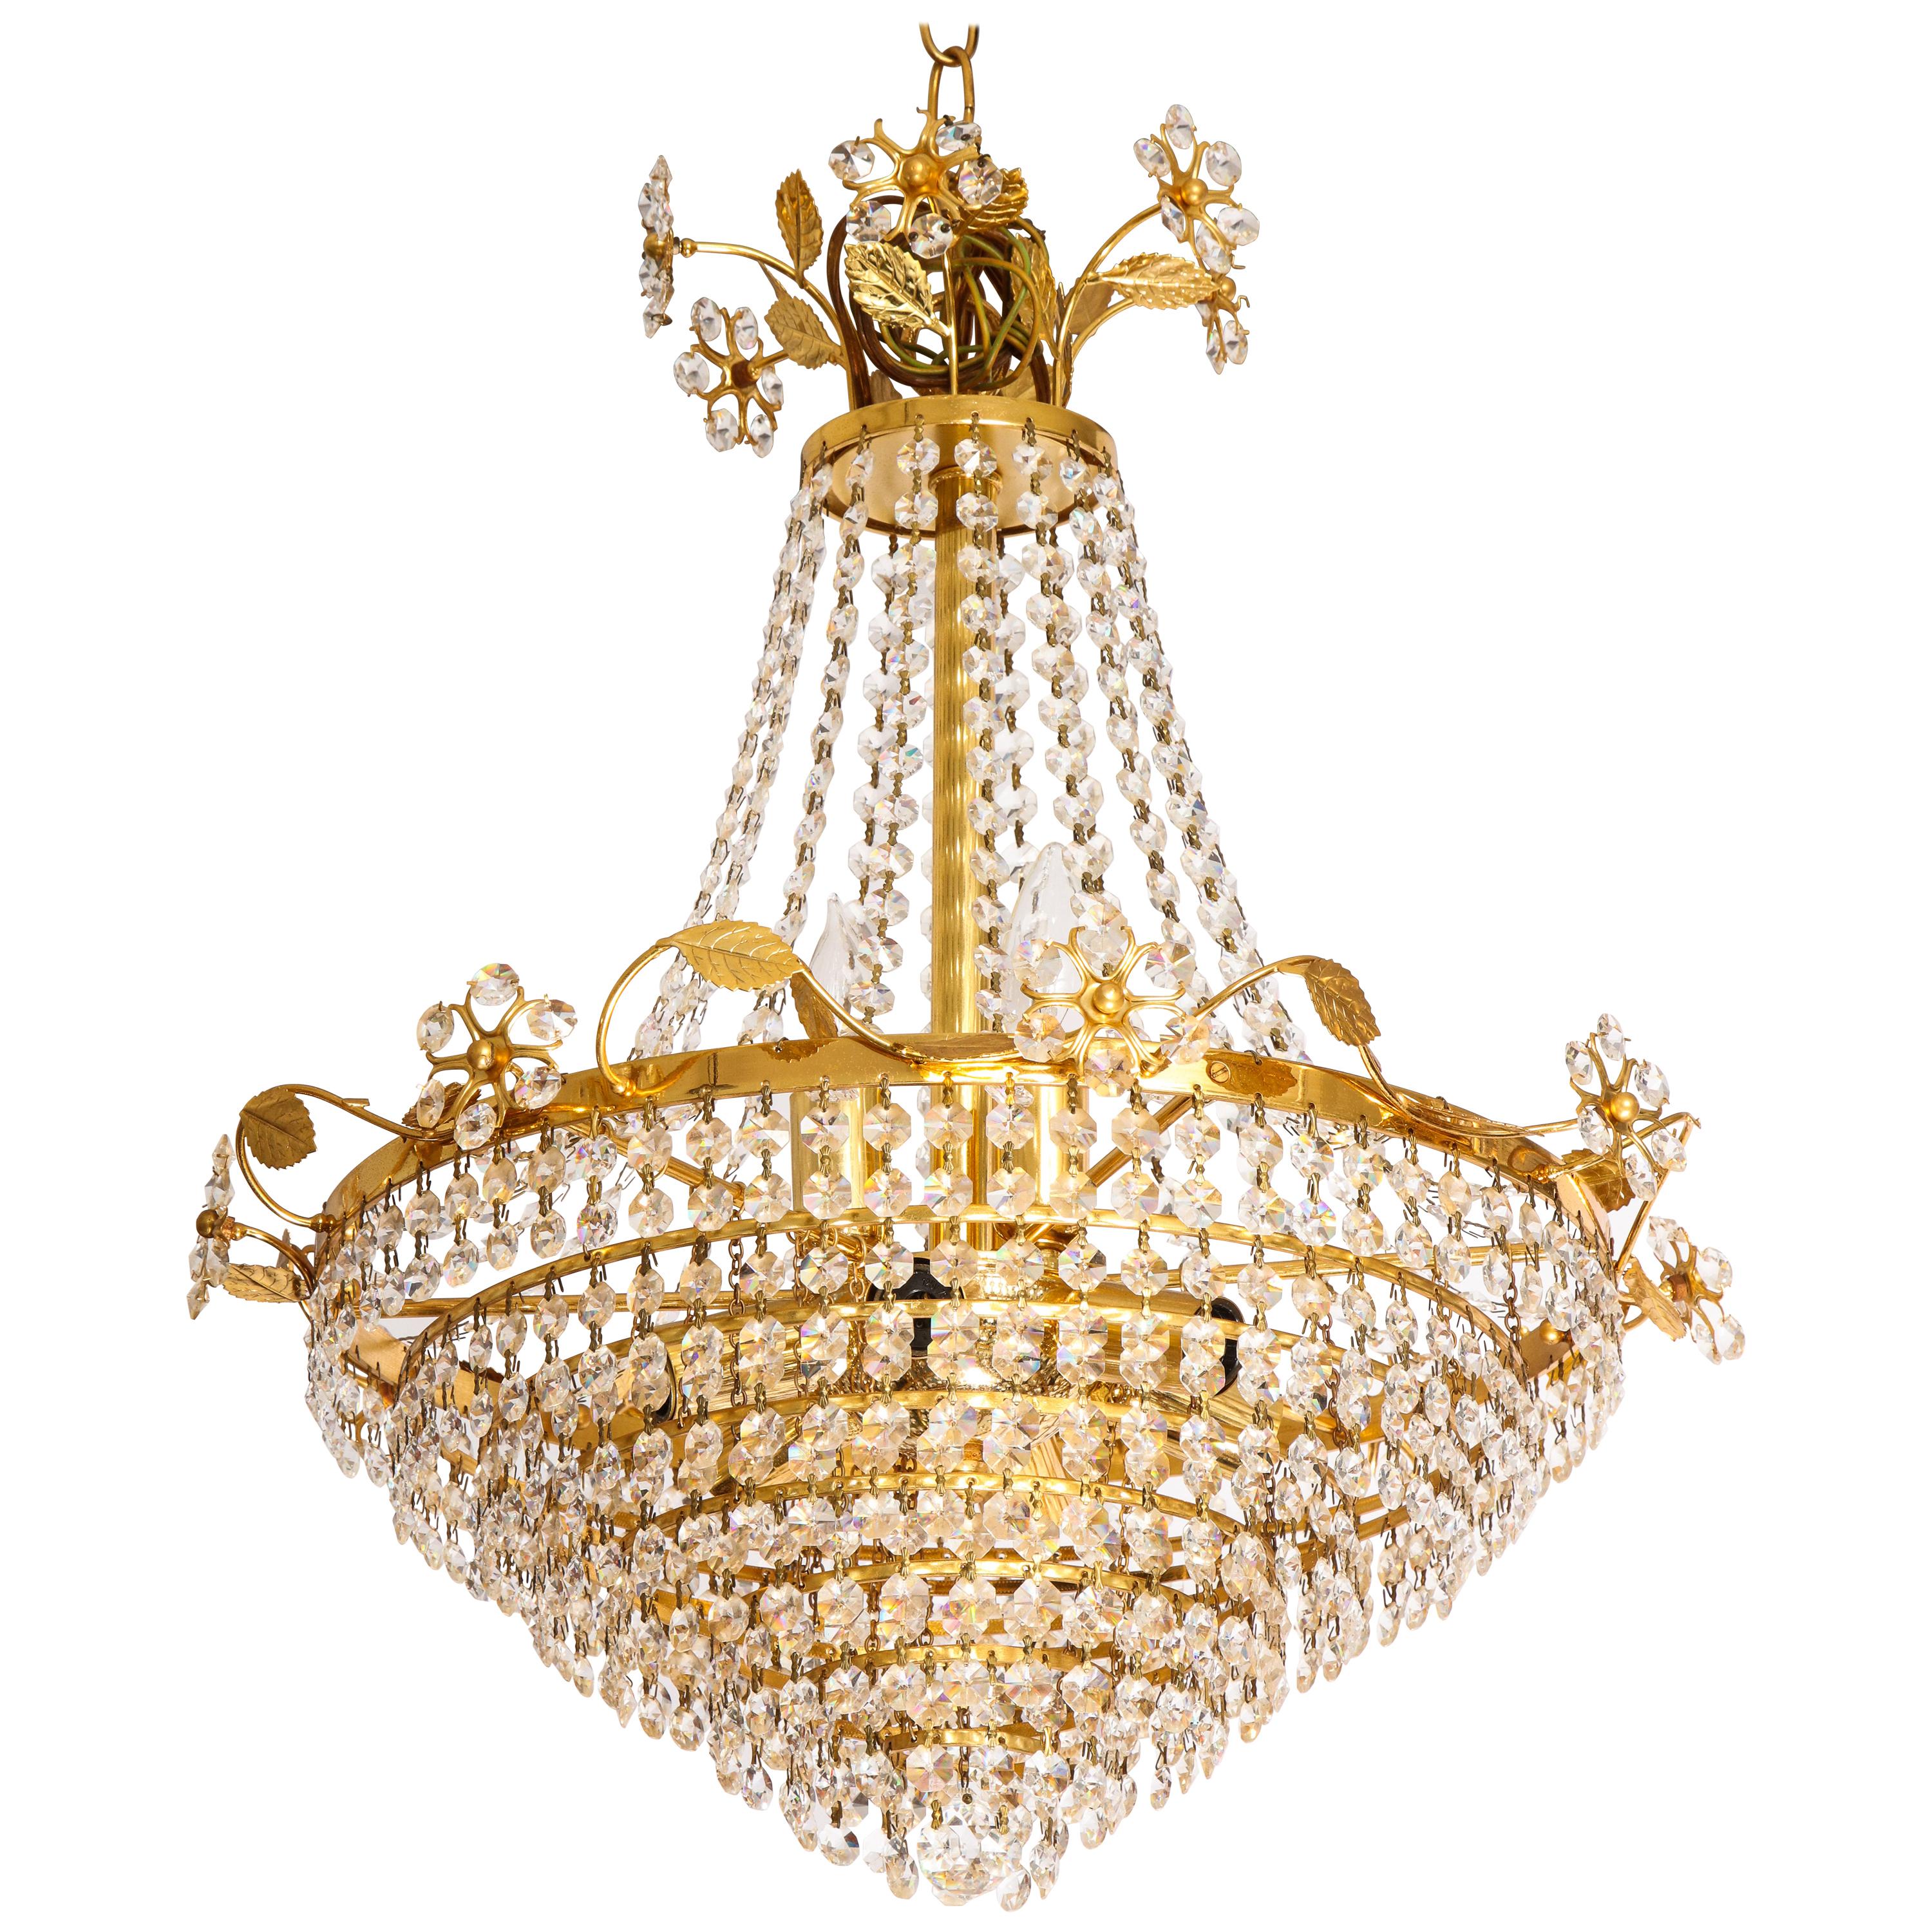 Tiered crystal and brass chandelier with flowers, vines and leaves by Palwa